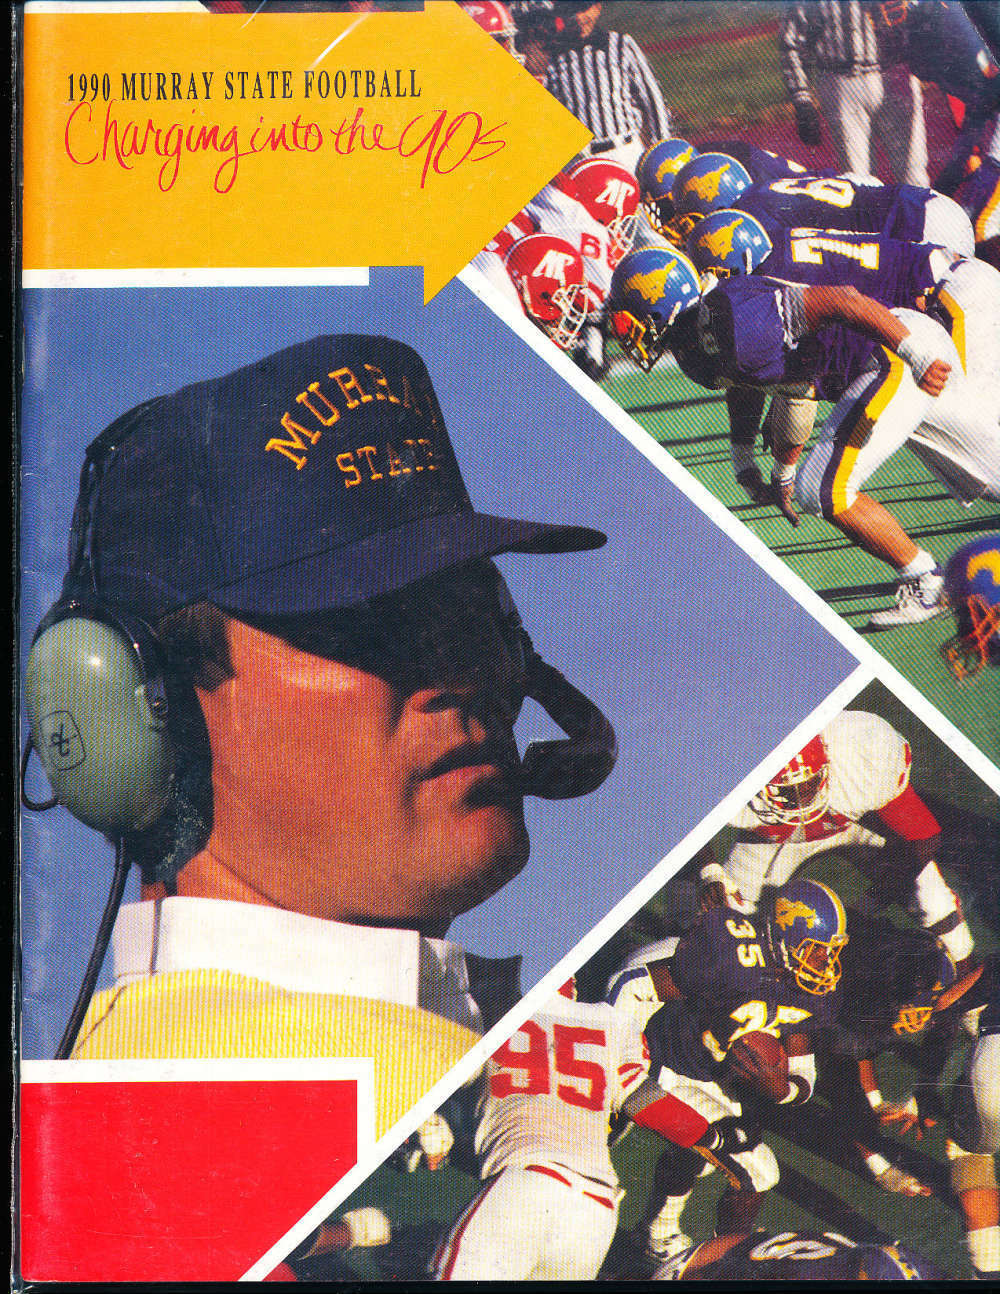 1990 Murray State Football Media Guide bx109